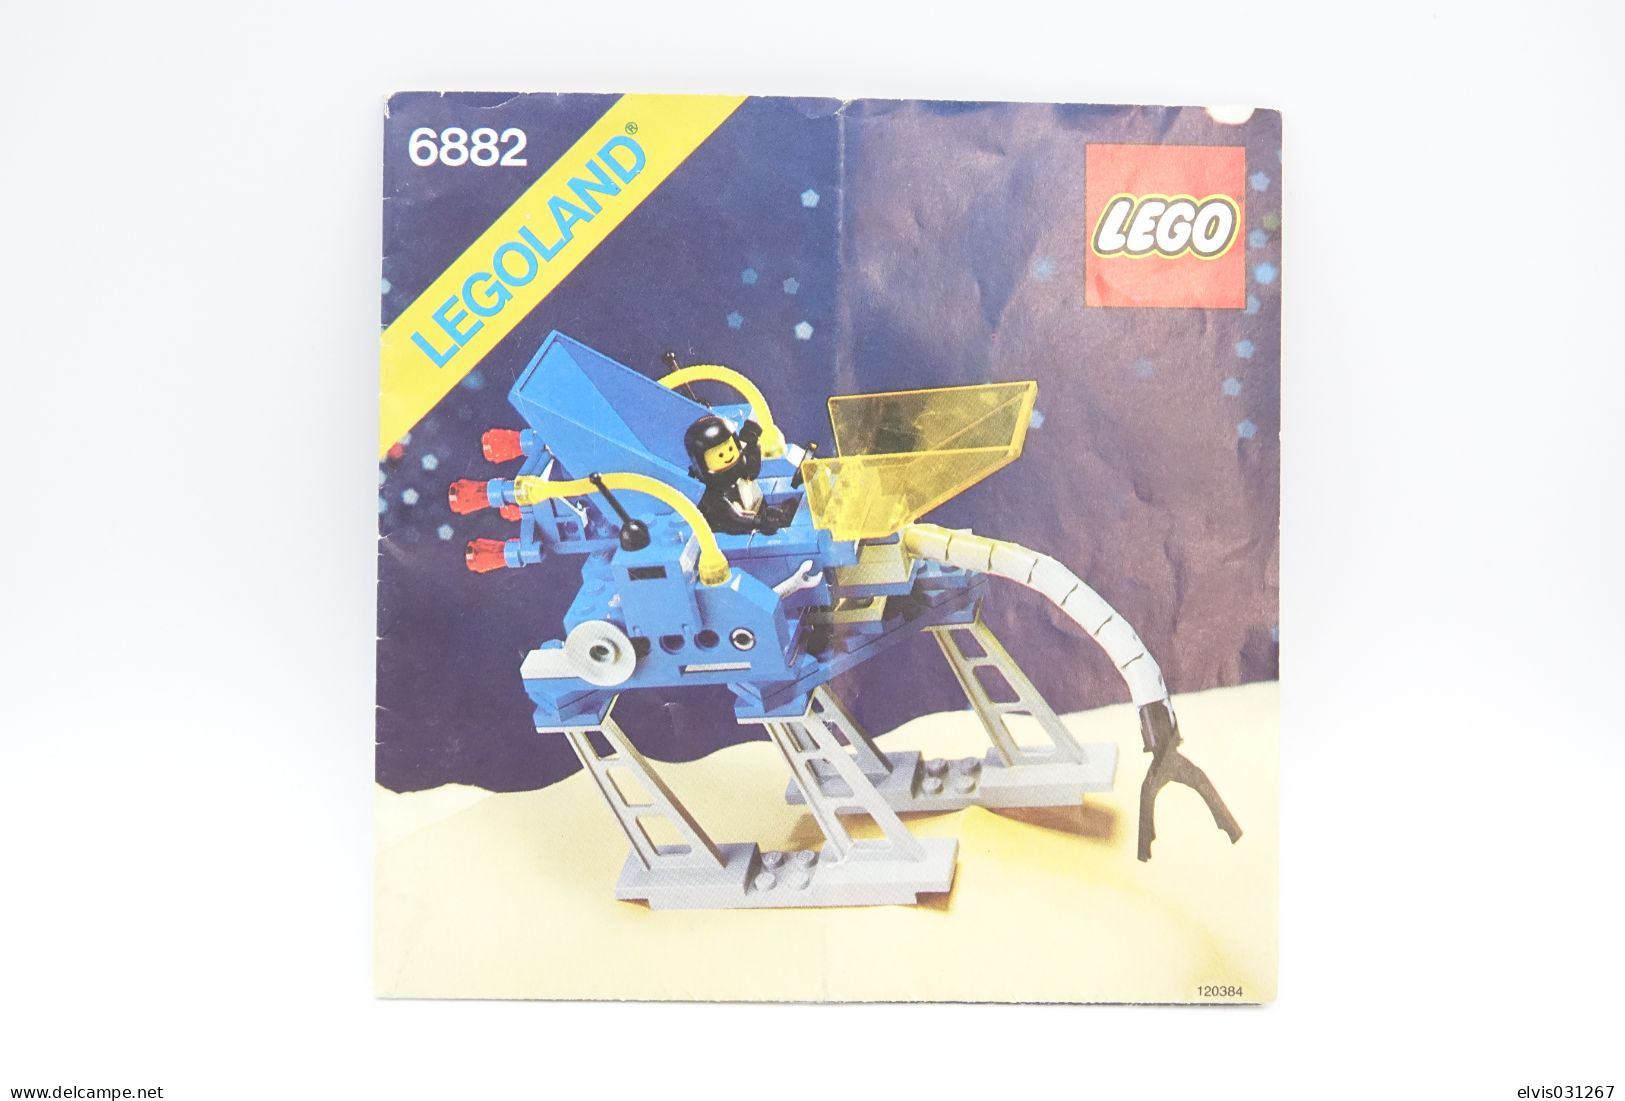 LEGO - 6882 Walking Astro Grappler With Instruction Manual - Original Lego 1985 - Vintage - Catalogues